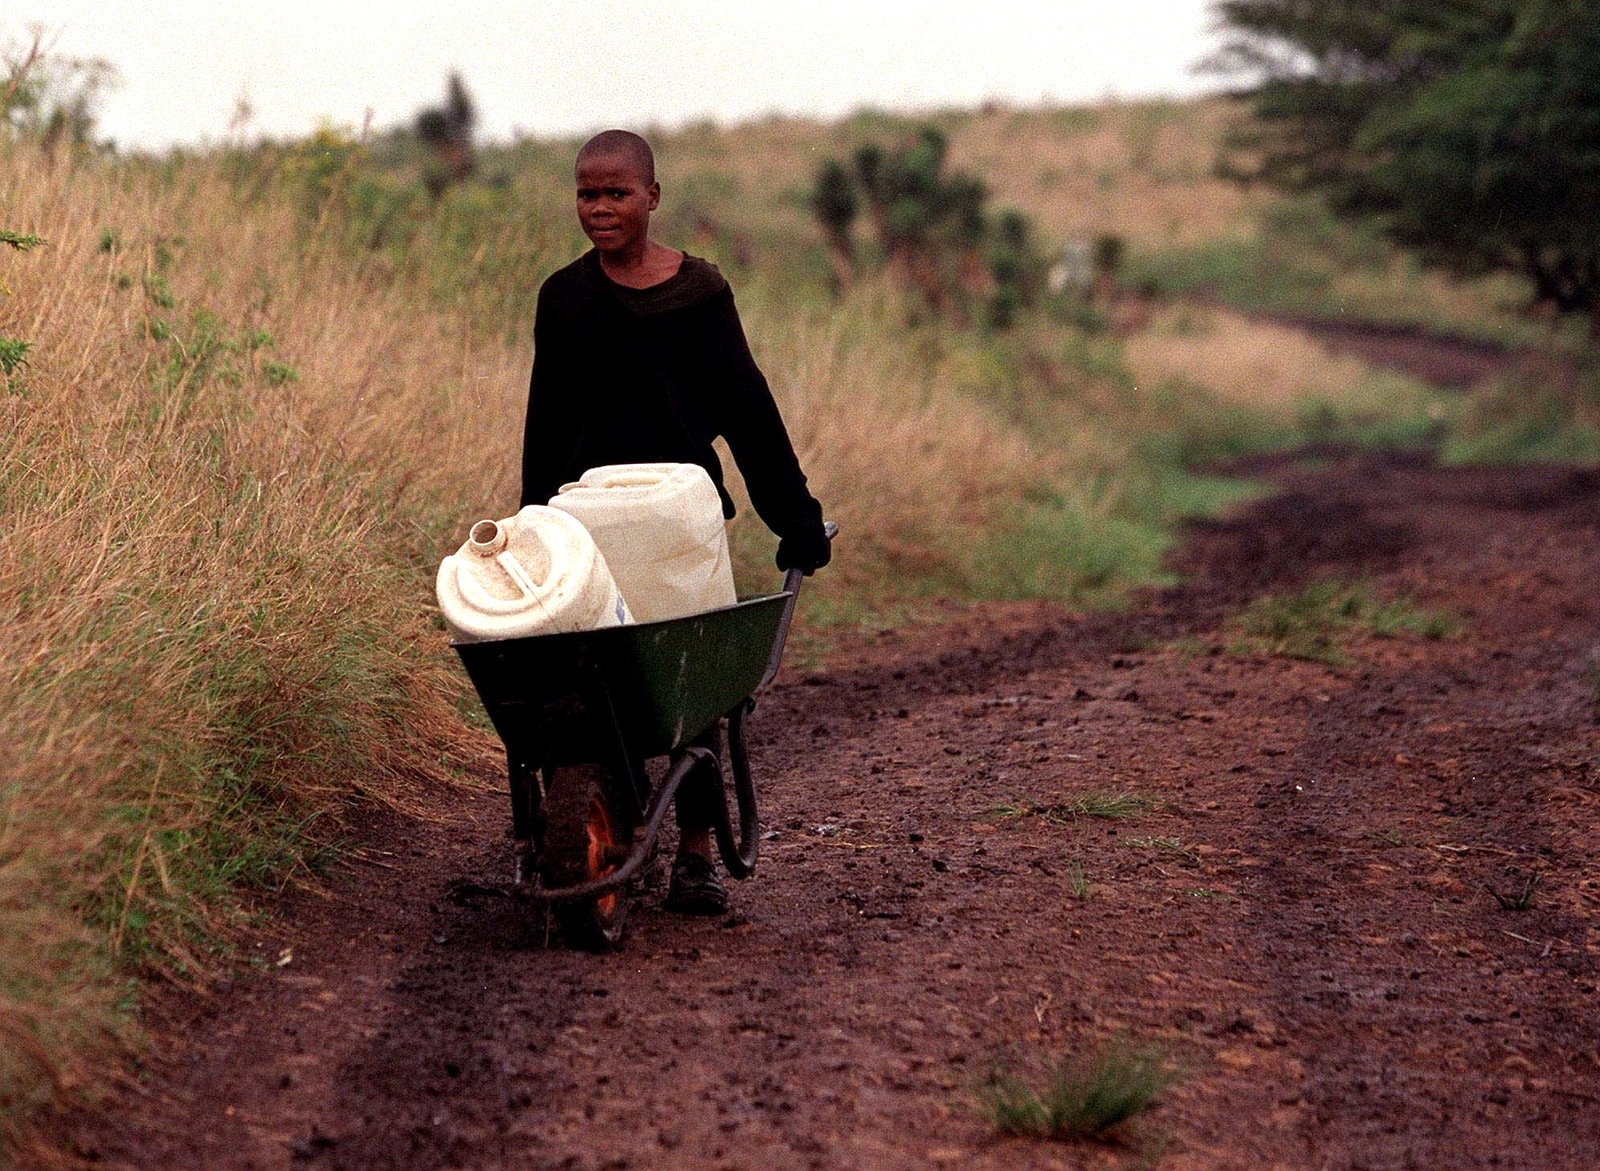 Phakamani Mpanza,14, delivers water to his home from a roadside borehole about 3 kilometres (1.8 miles) away near Empangeni (about 160 kilometres (99 miles) north of Durban, Oct. 27 2000. (AP/ Cobus Bodenstein)